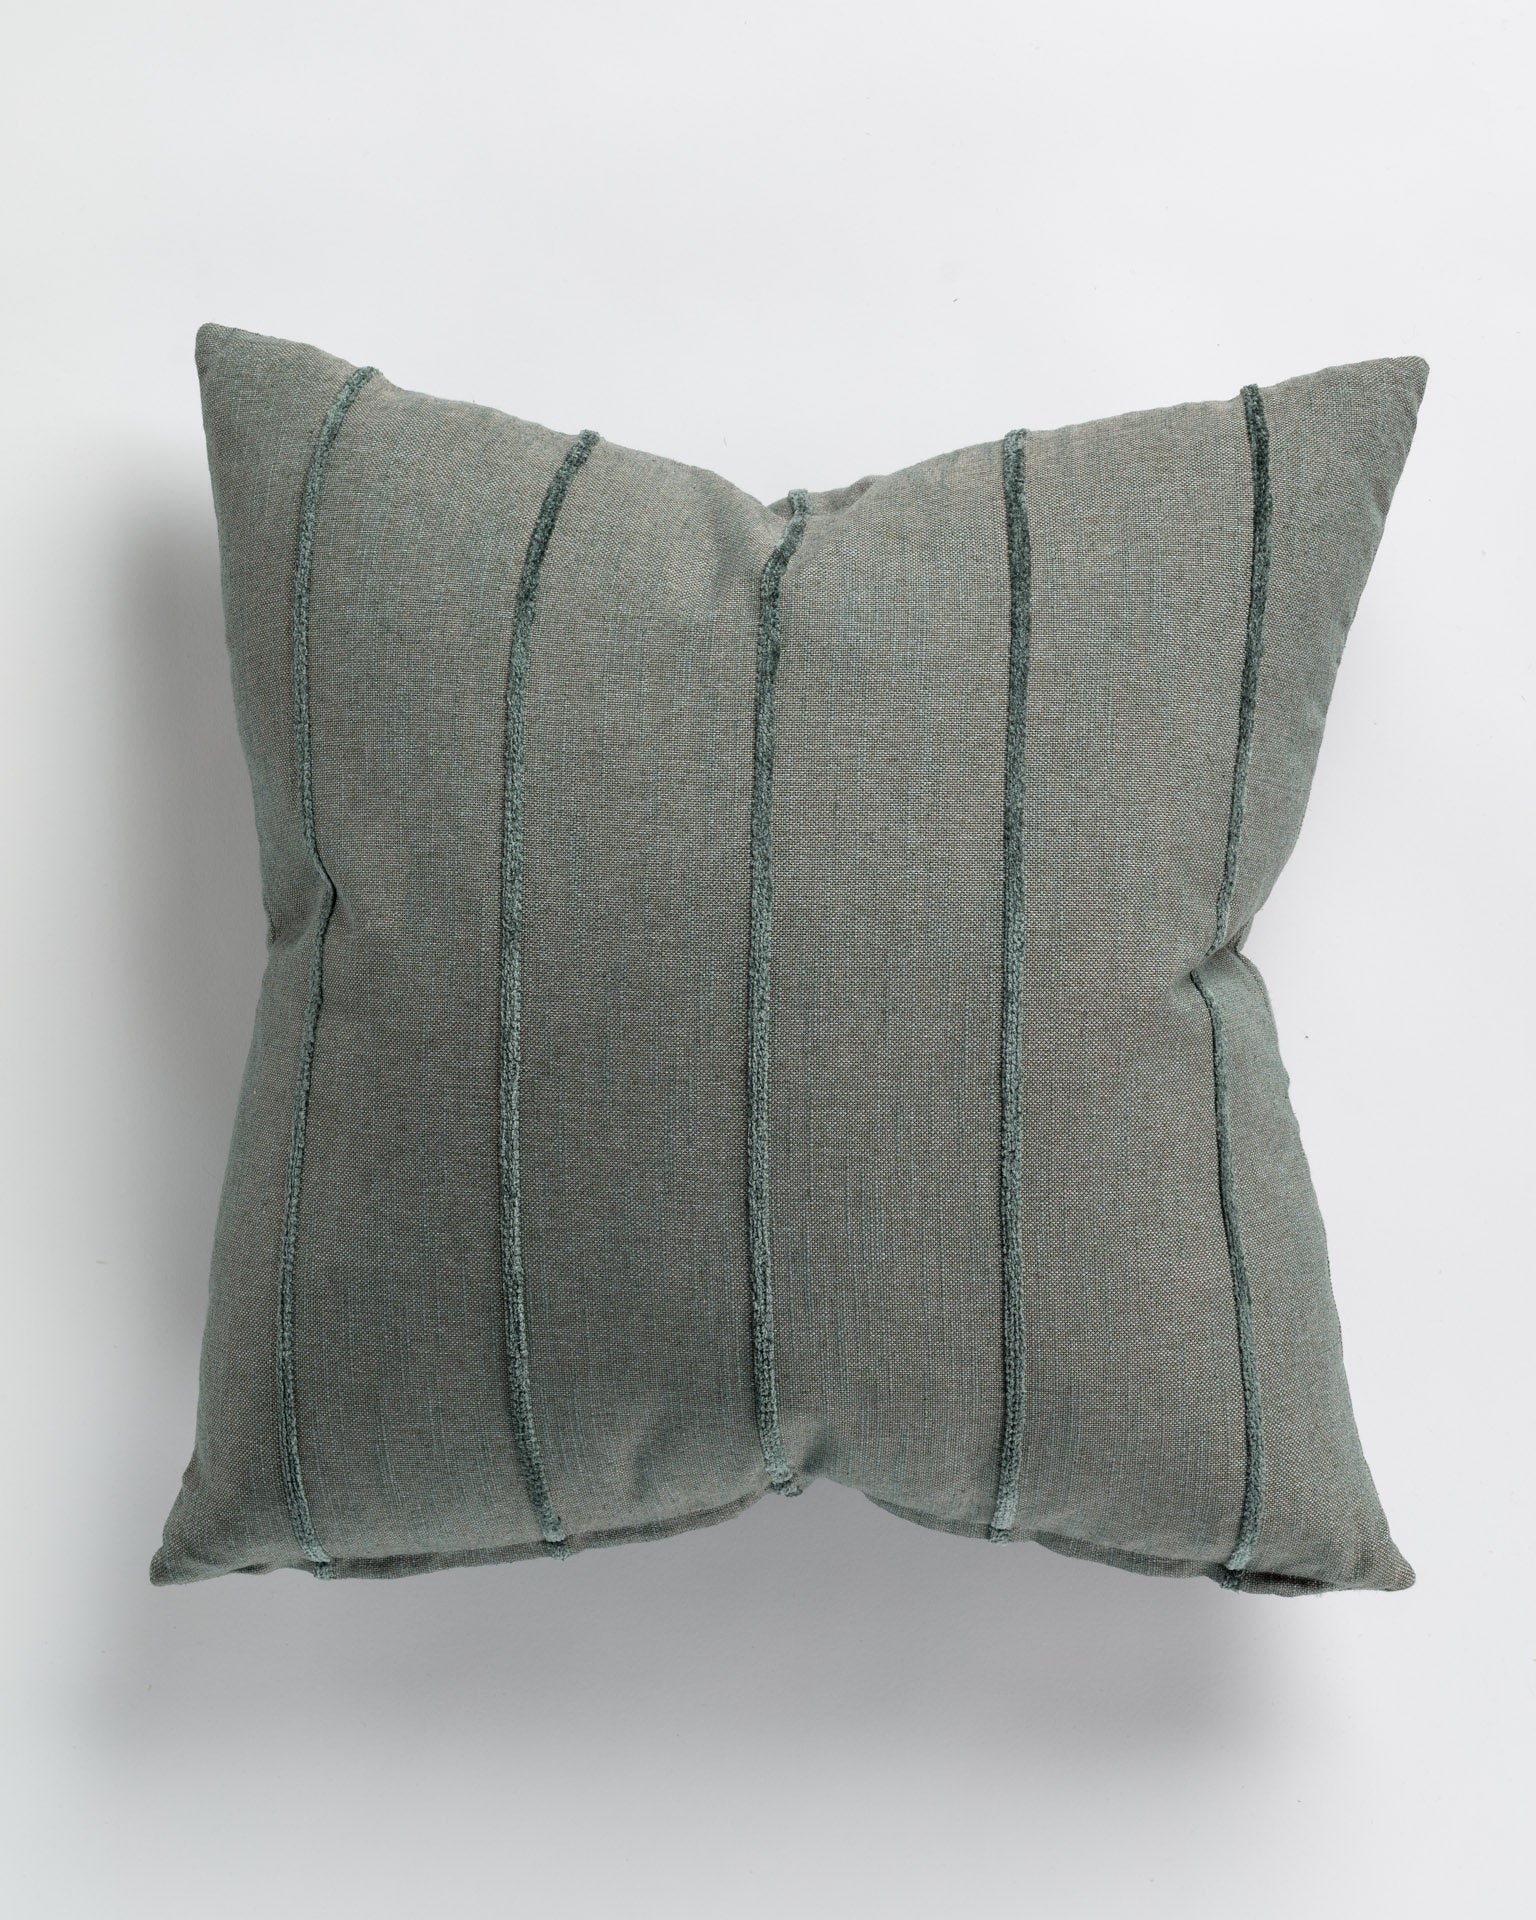 A Hilo Stripe Blue Spruce Pillow 26x26 with a muted green fabric, featuring three vertical stitched stripes, displayed against a light grey background in Gabby style.